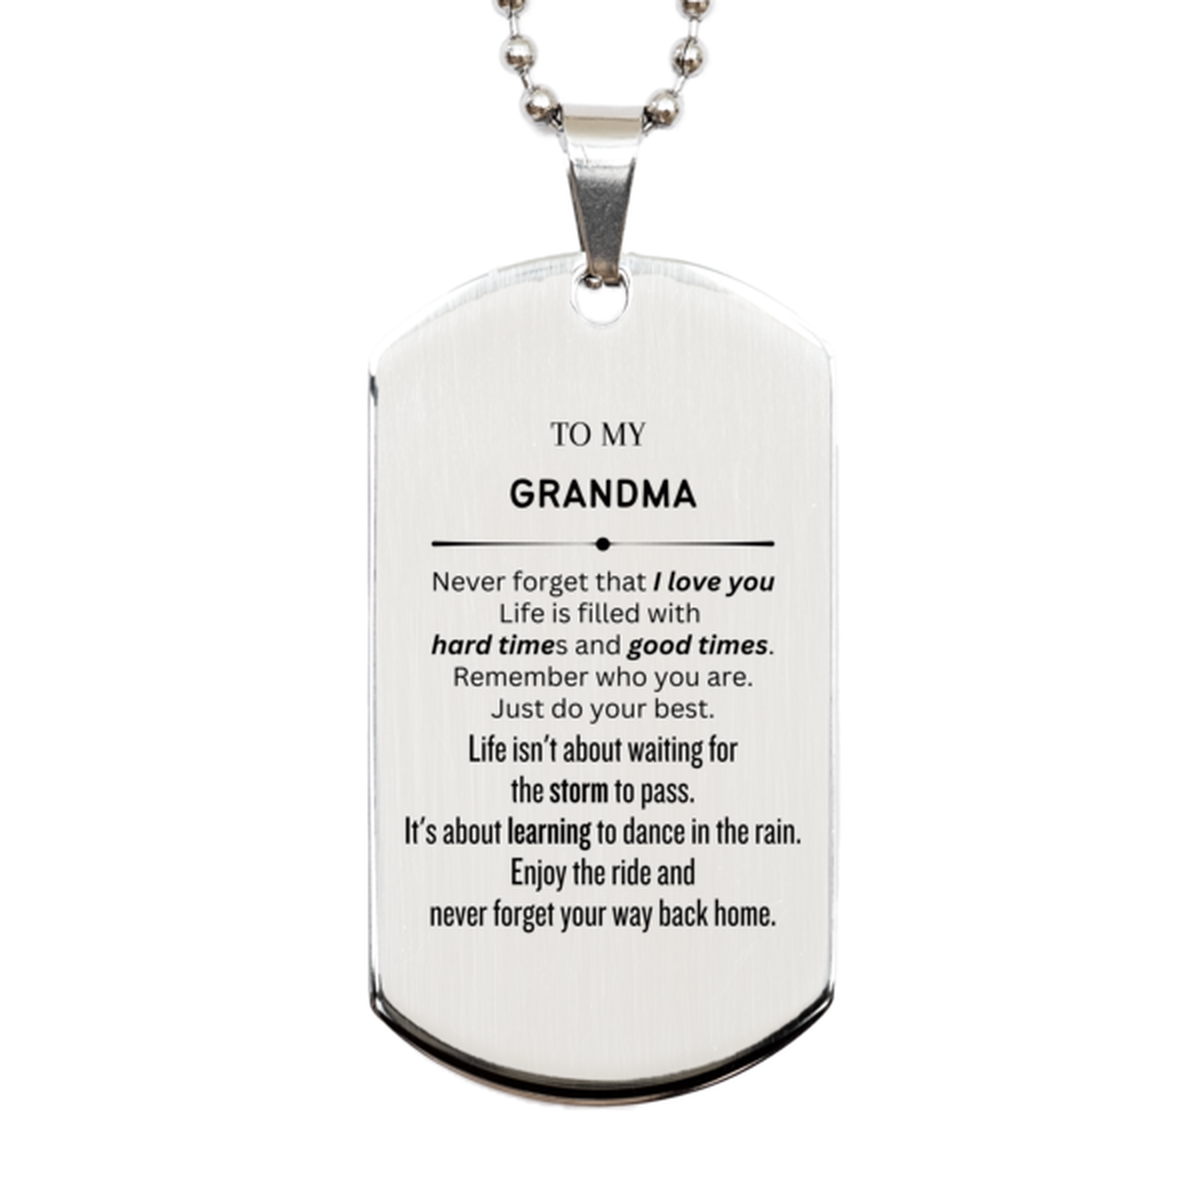 Christmas Grandma Silver Dog Tag Gifts, To My Grandma Birthday Thank You Gifts For Grandma, Graduation Unique Gifts For Grandma To My Grandma Never forget that I love you life is filled with hard times and good times. Remember who you are. Just do your be